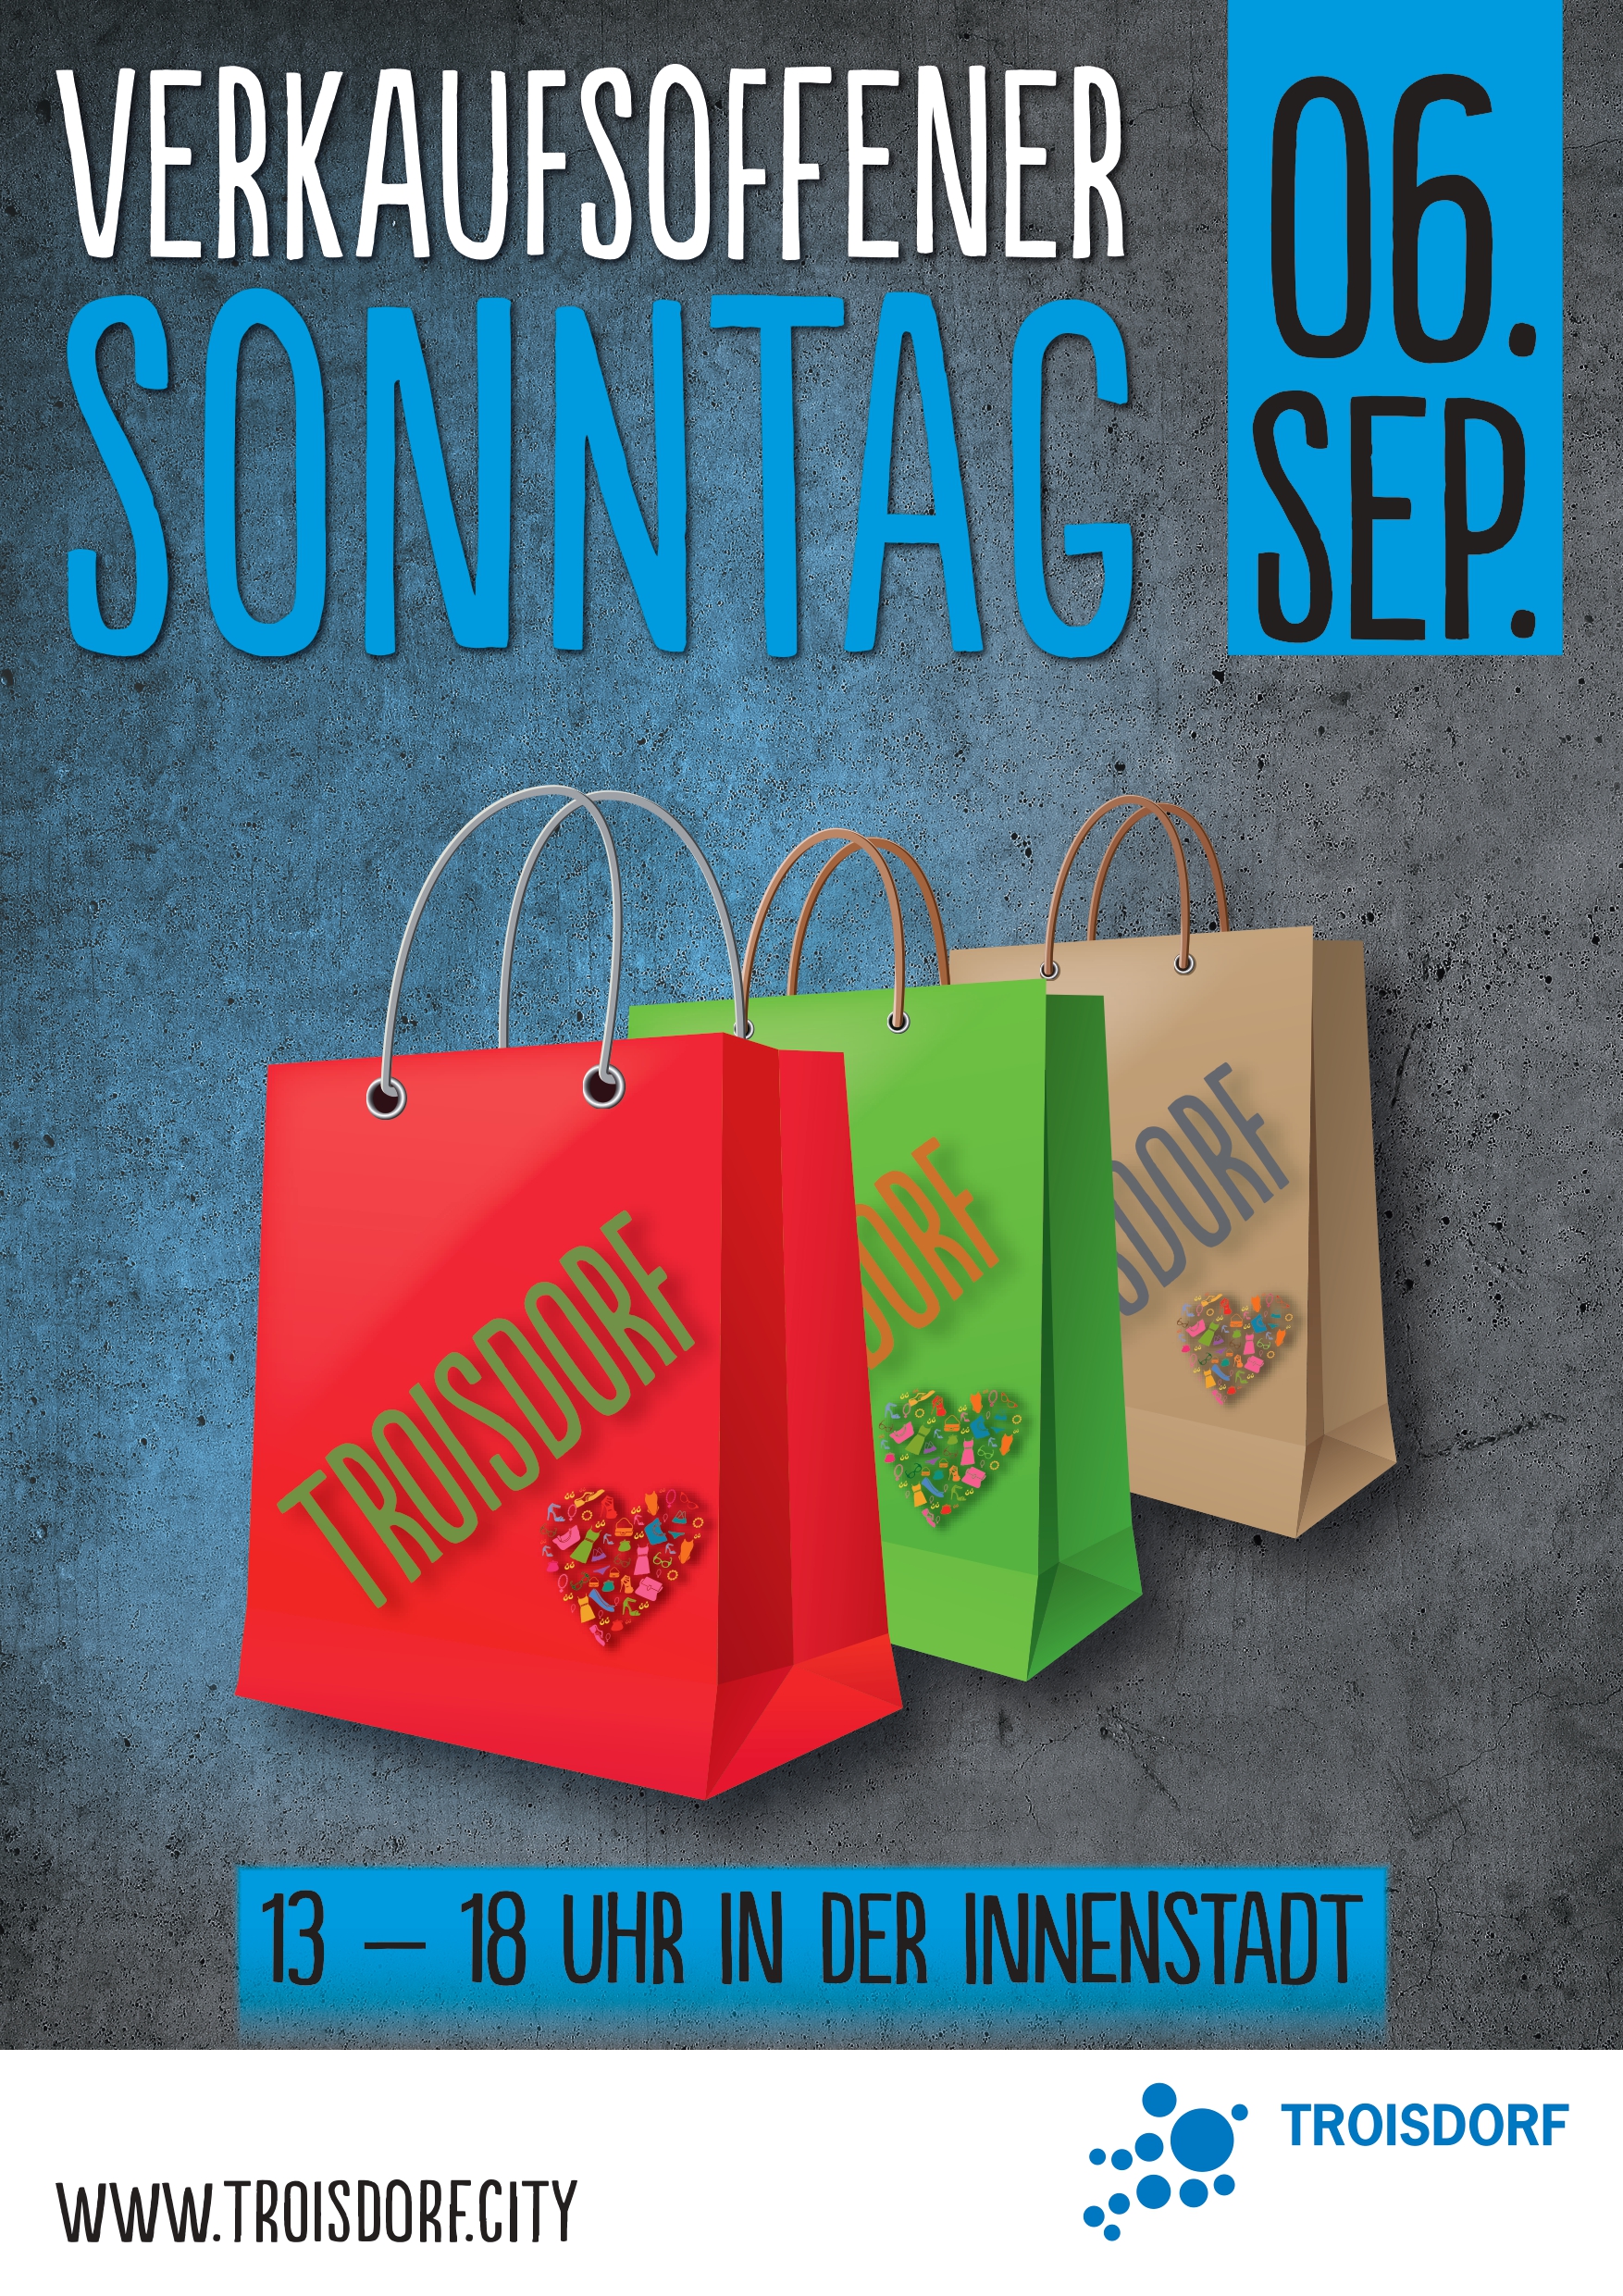 Plakat Verkaufsoffener Sontag A3_pages-to-jpg-0001